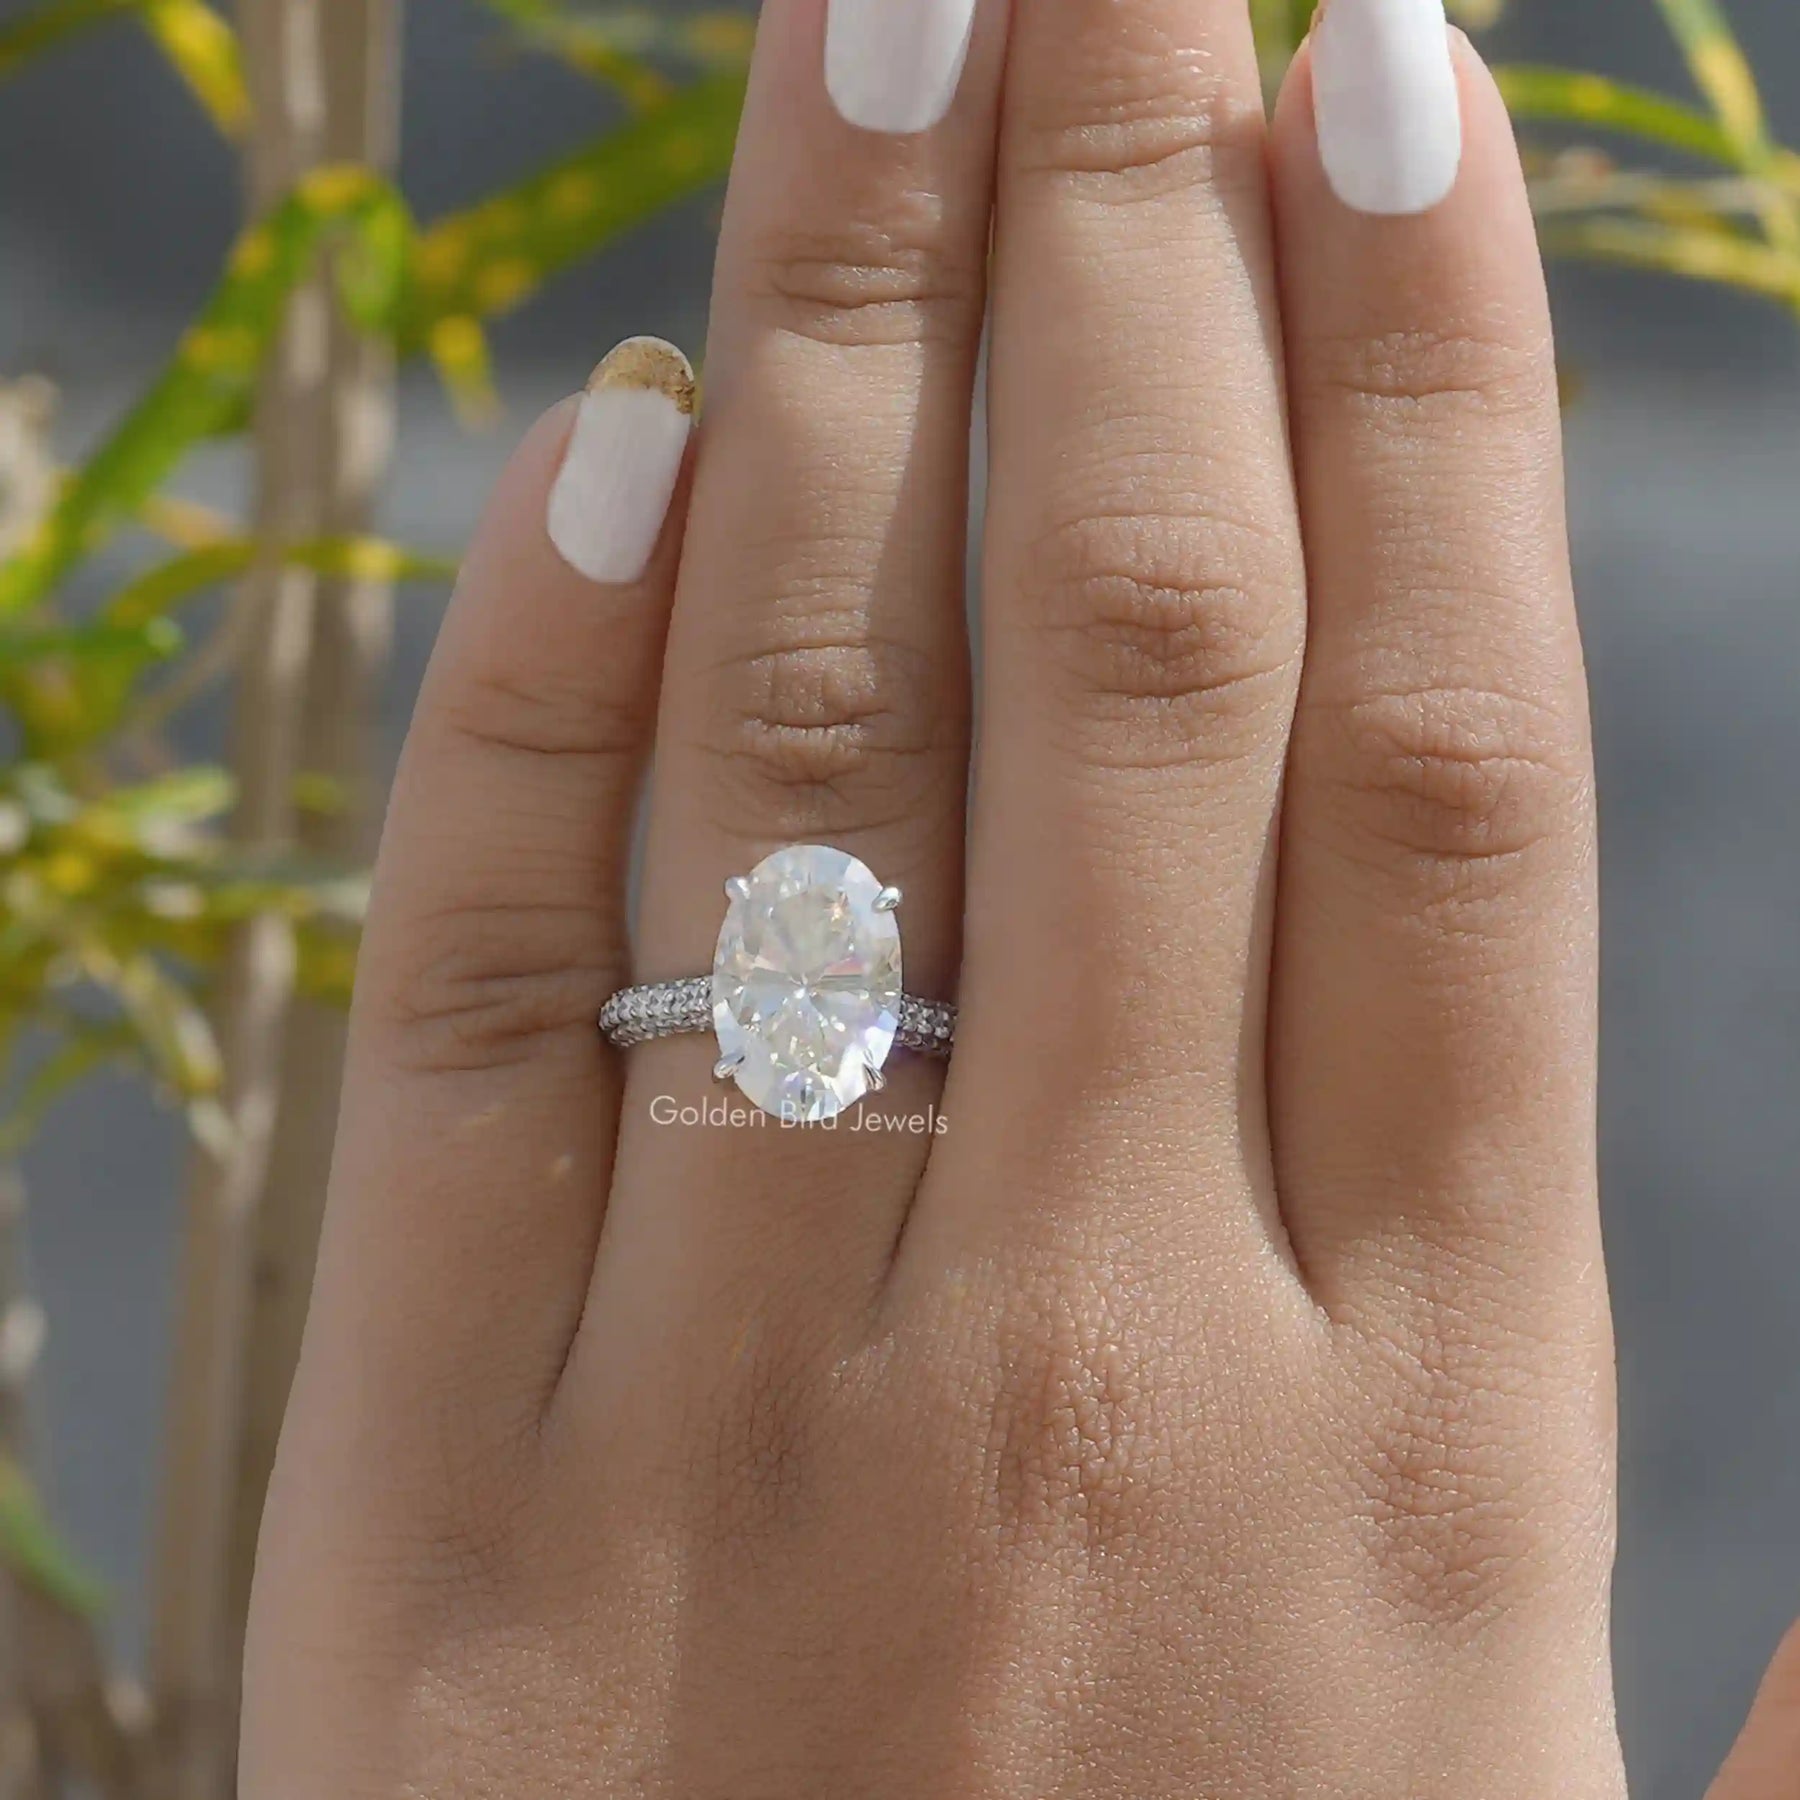 [In Finger a Moissanite Engagement Ring Made Of Oval Cut Stone]-[Golden Bird Jewels]